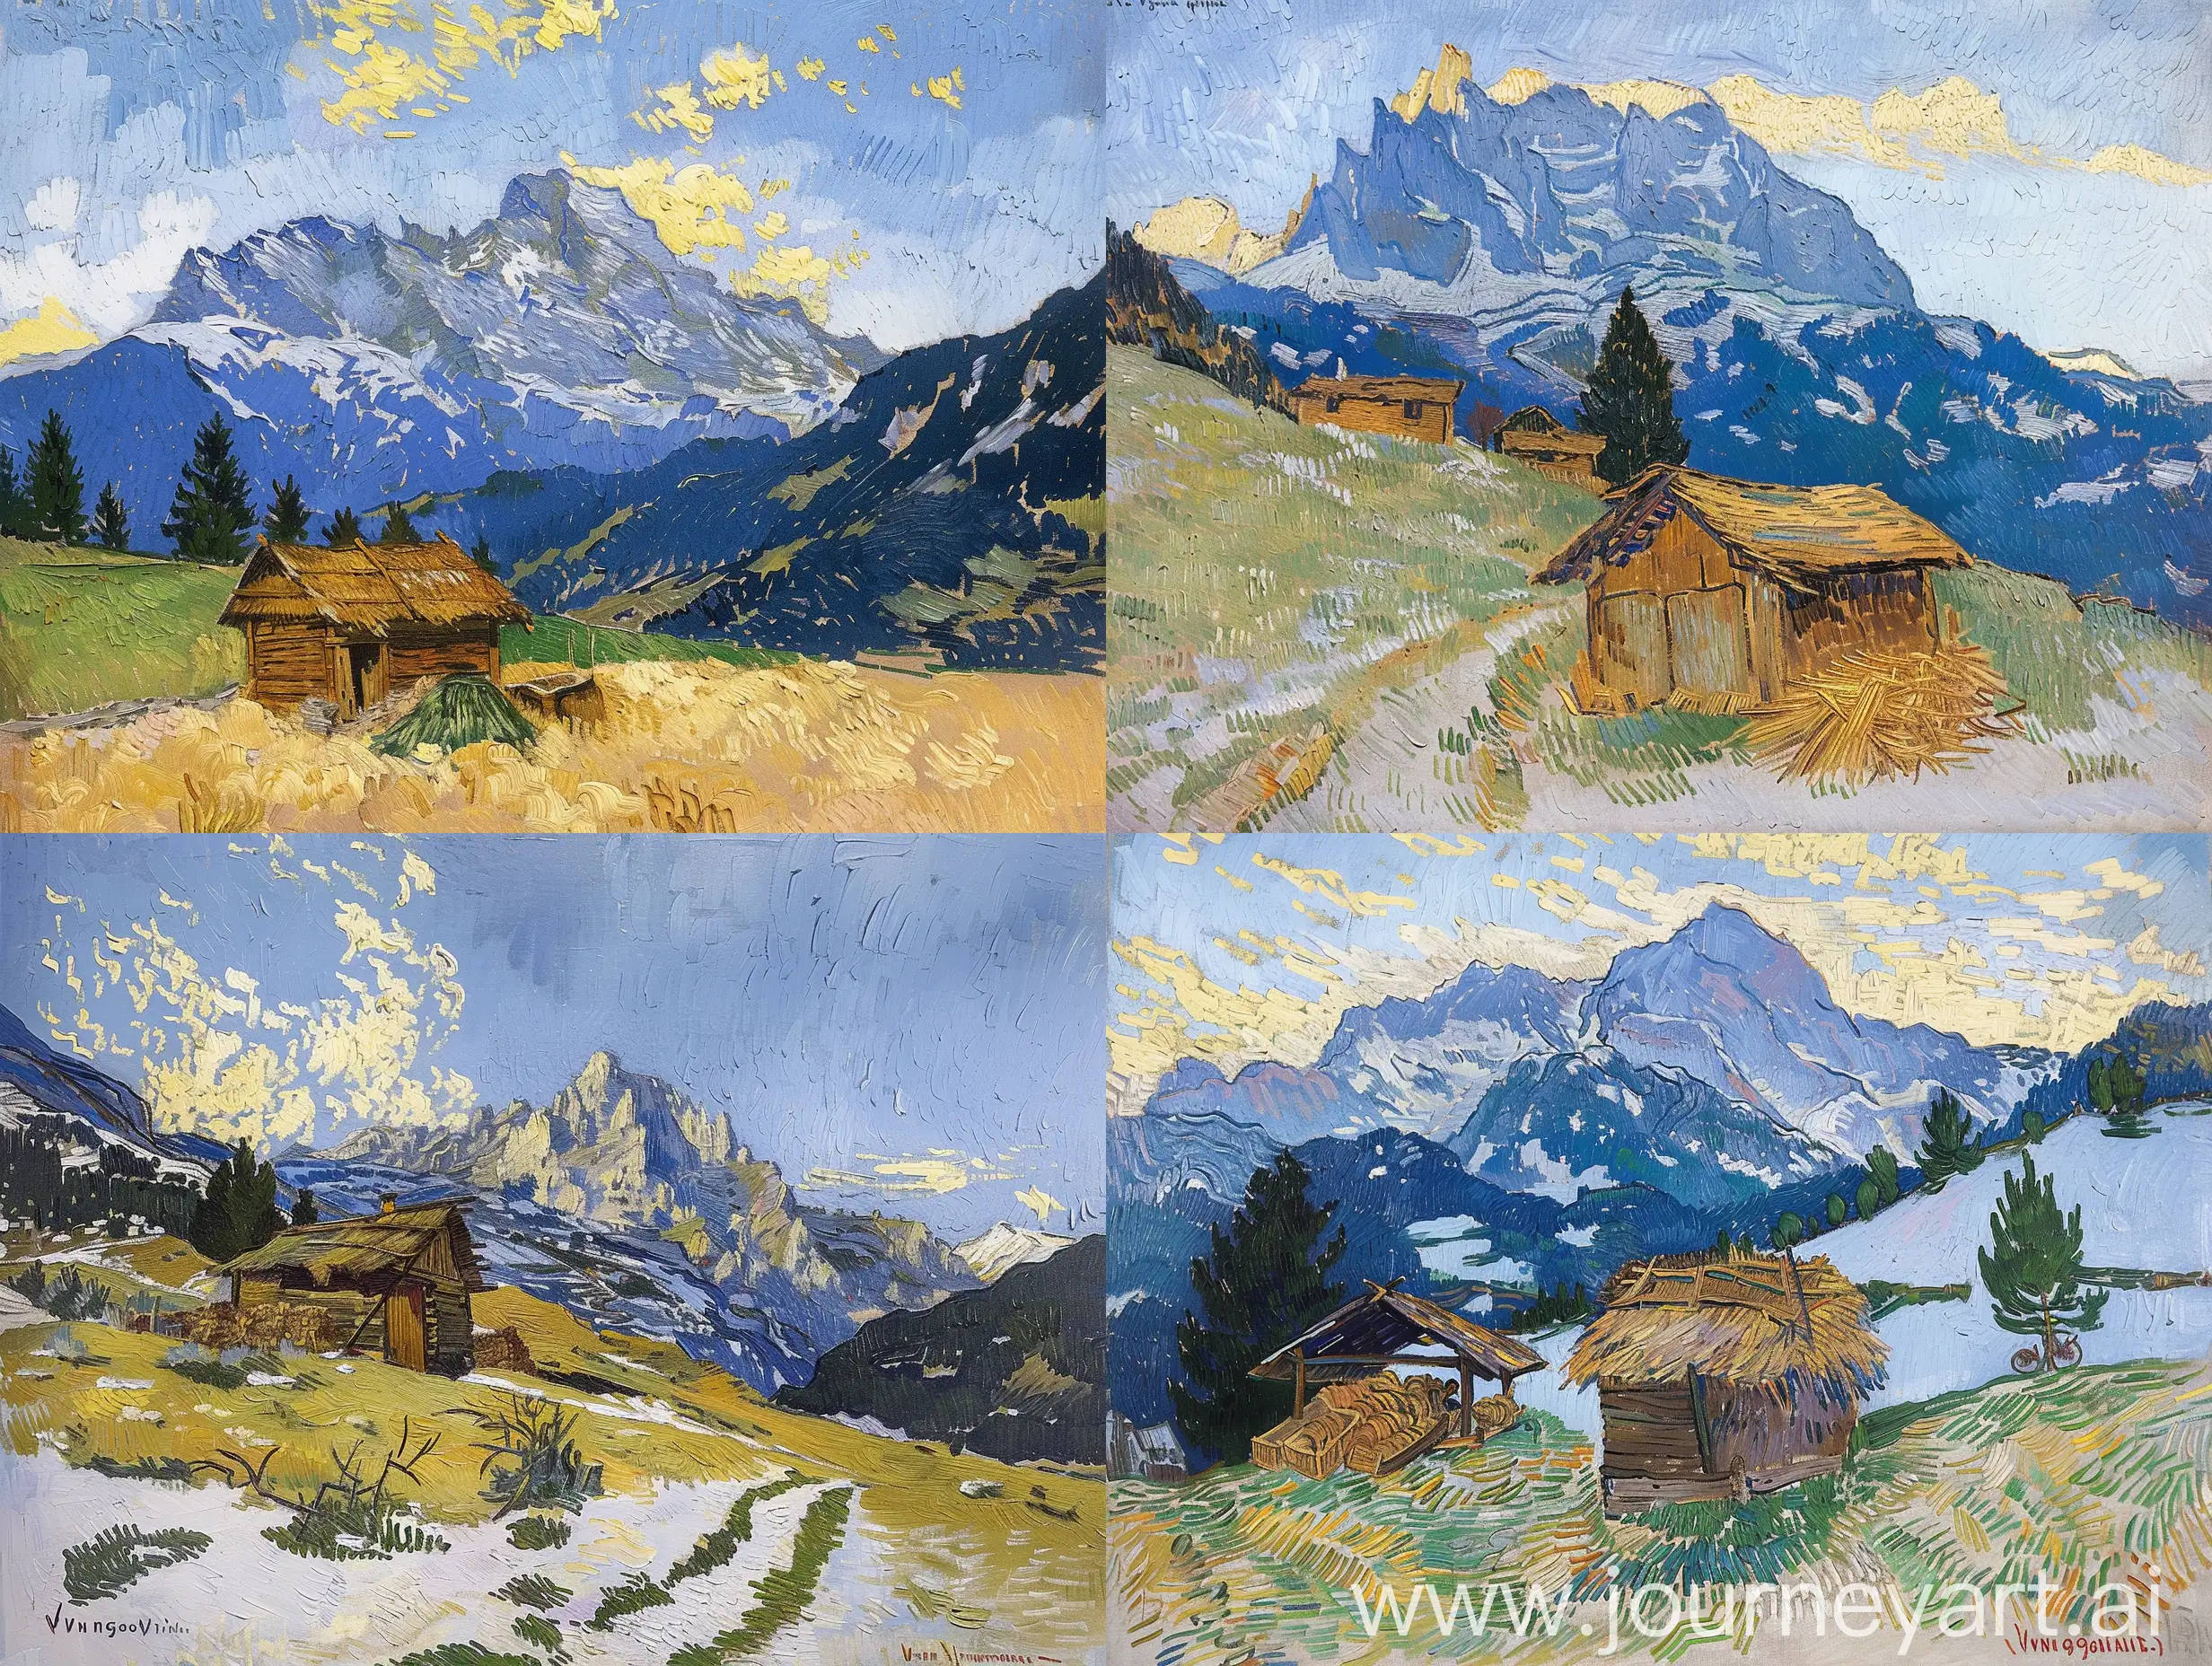 oil painting by van gogh of a hut in mountains --iw 2.0